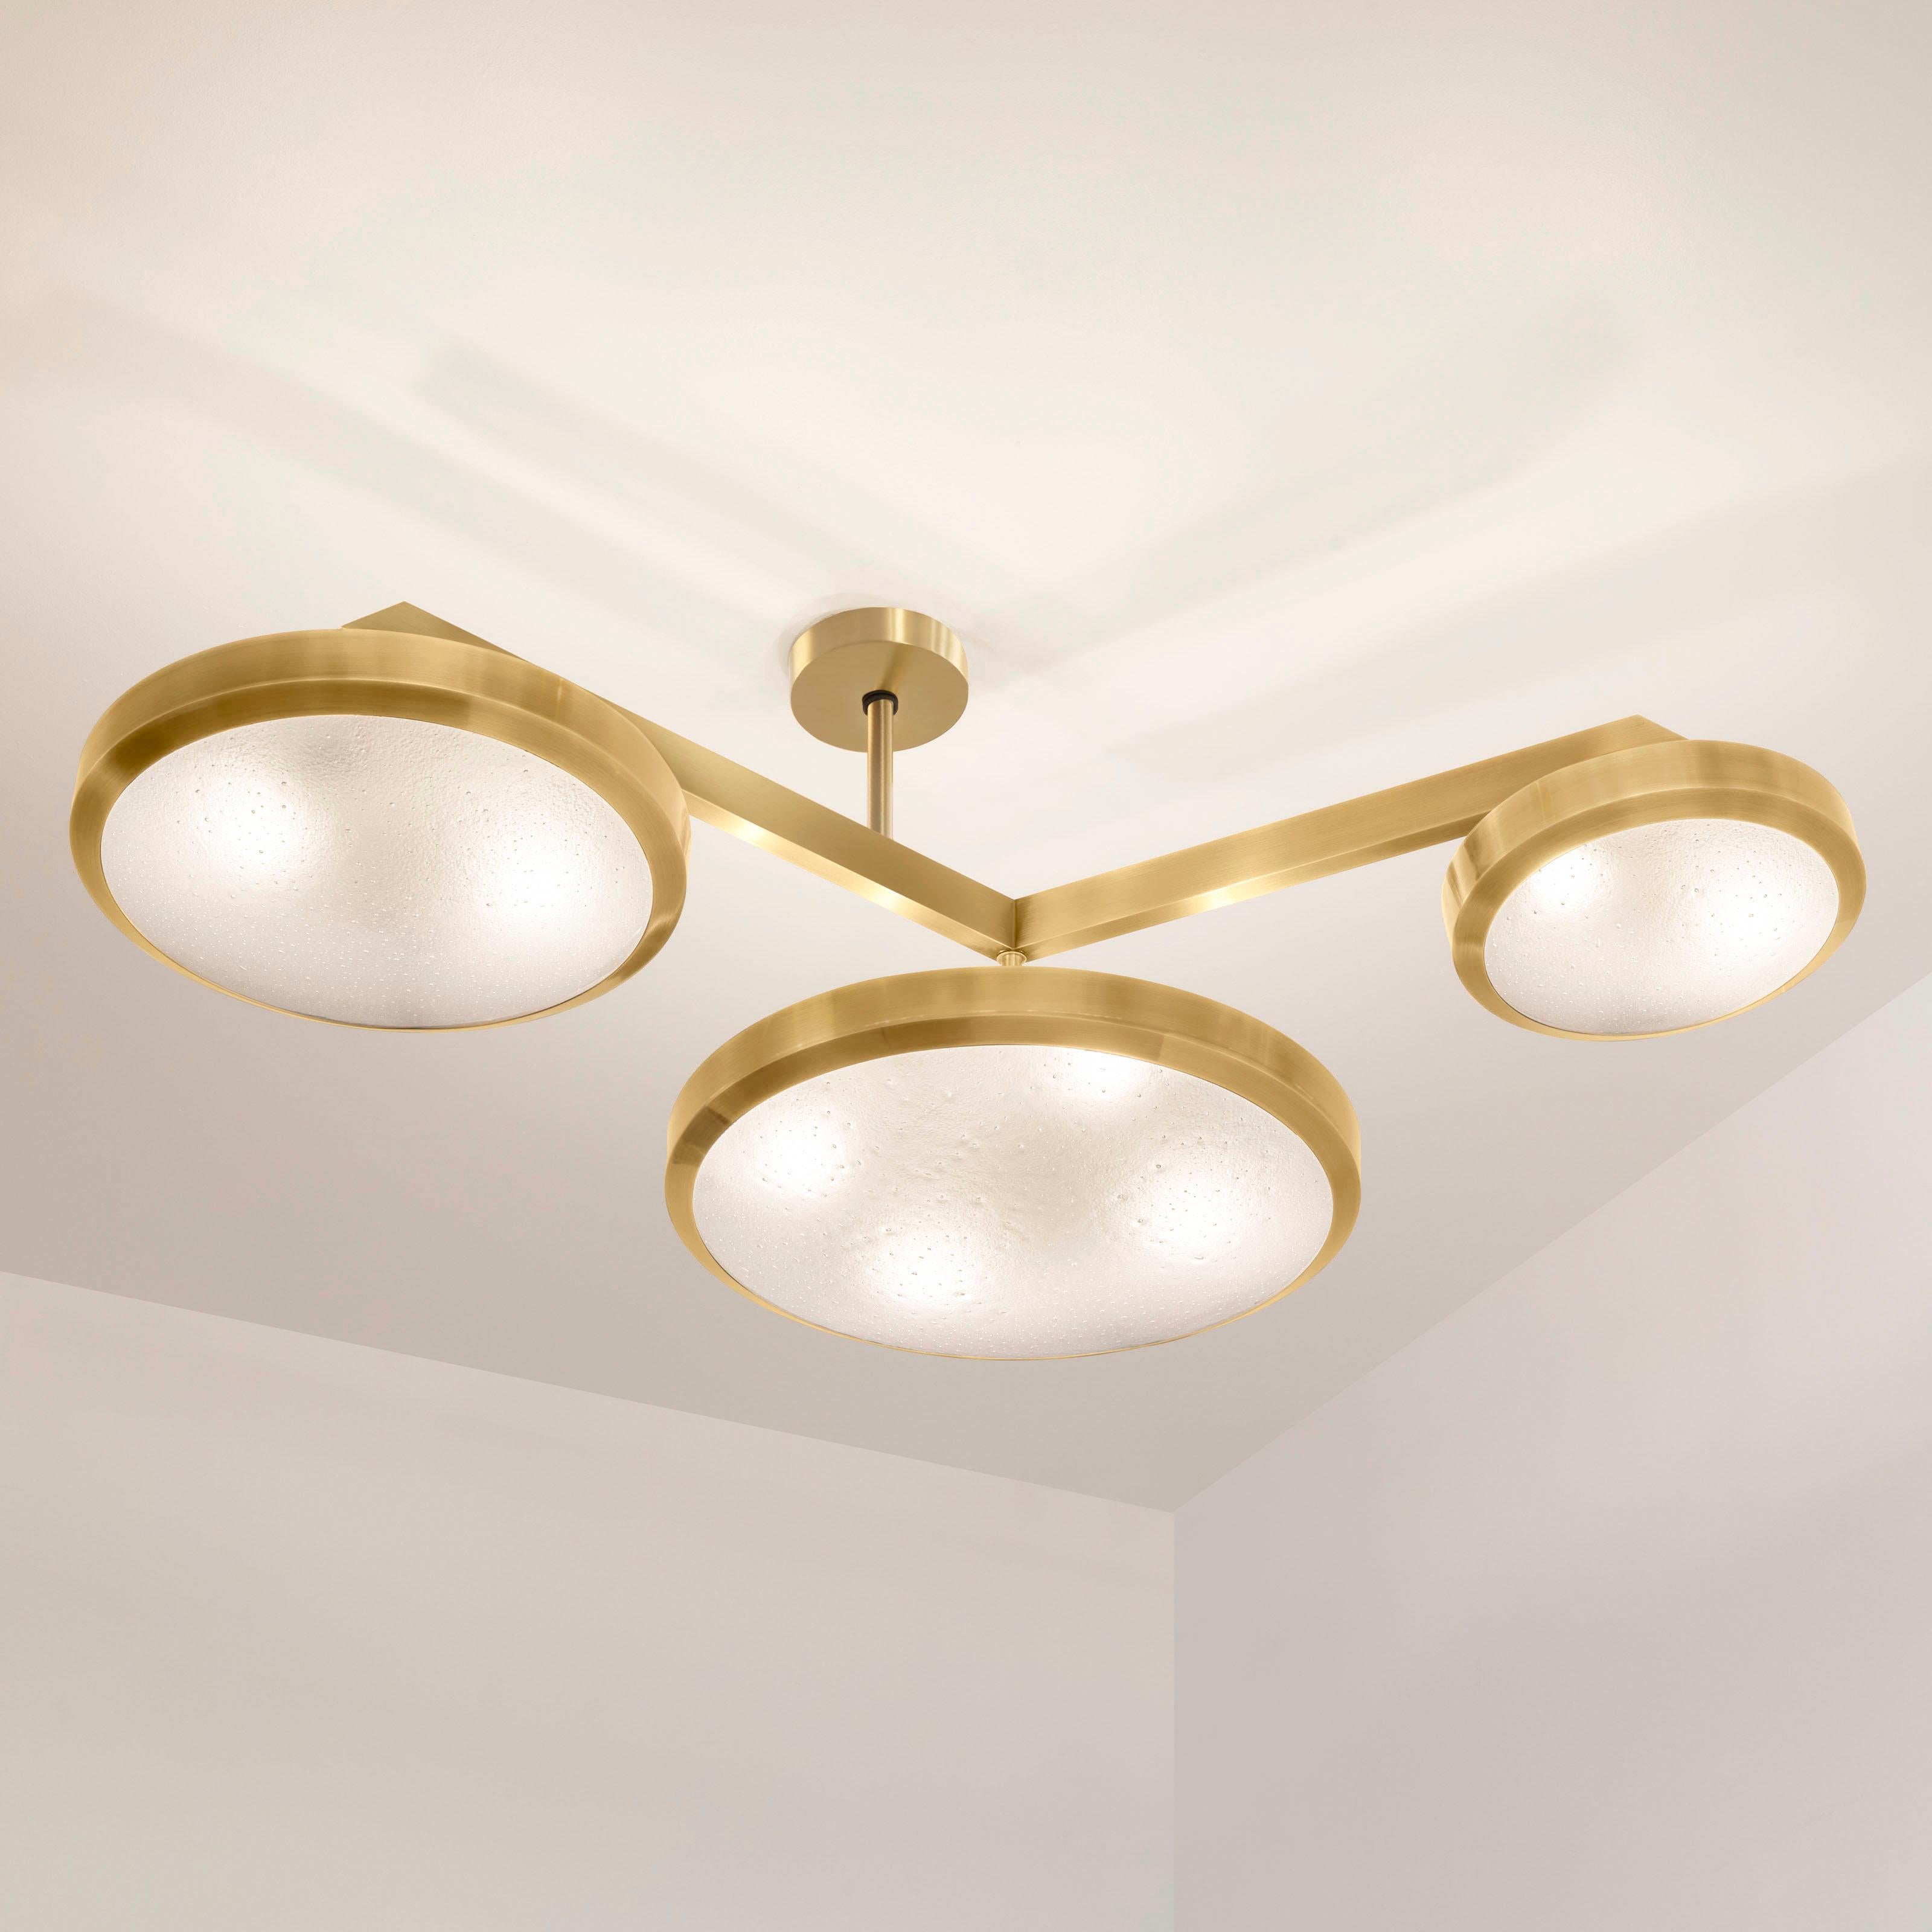 Zeta Ceiling Light by Gaspare Asaro - Polished Brass Finish In New Condition For Sale In New York, NY